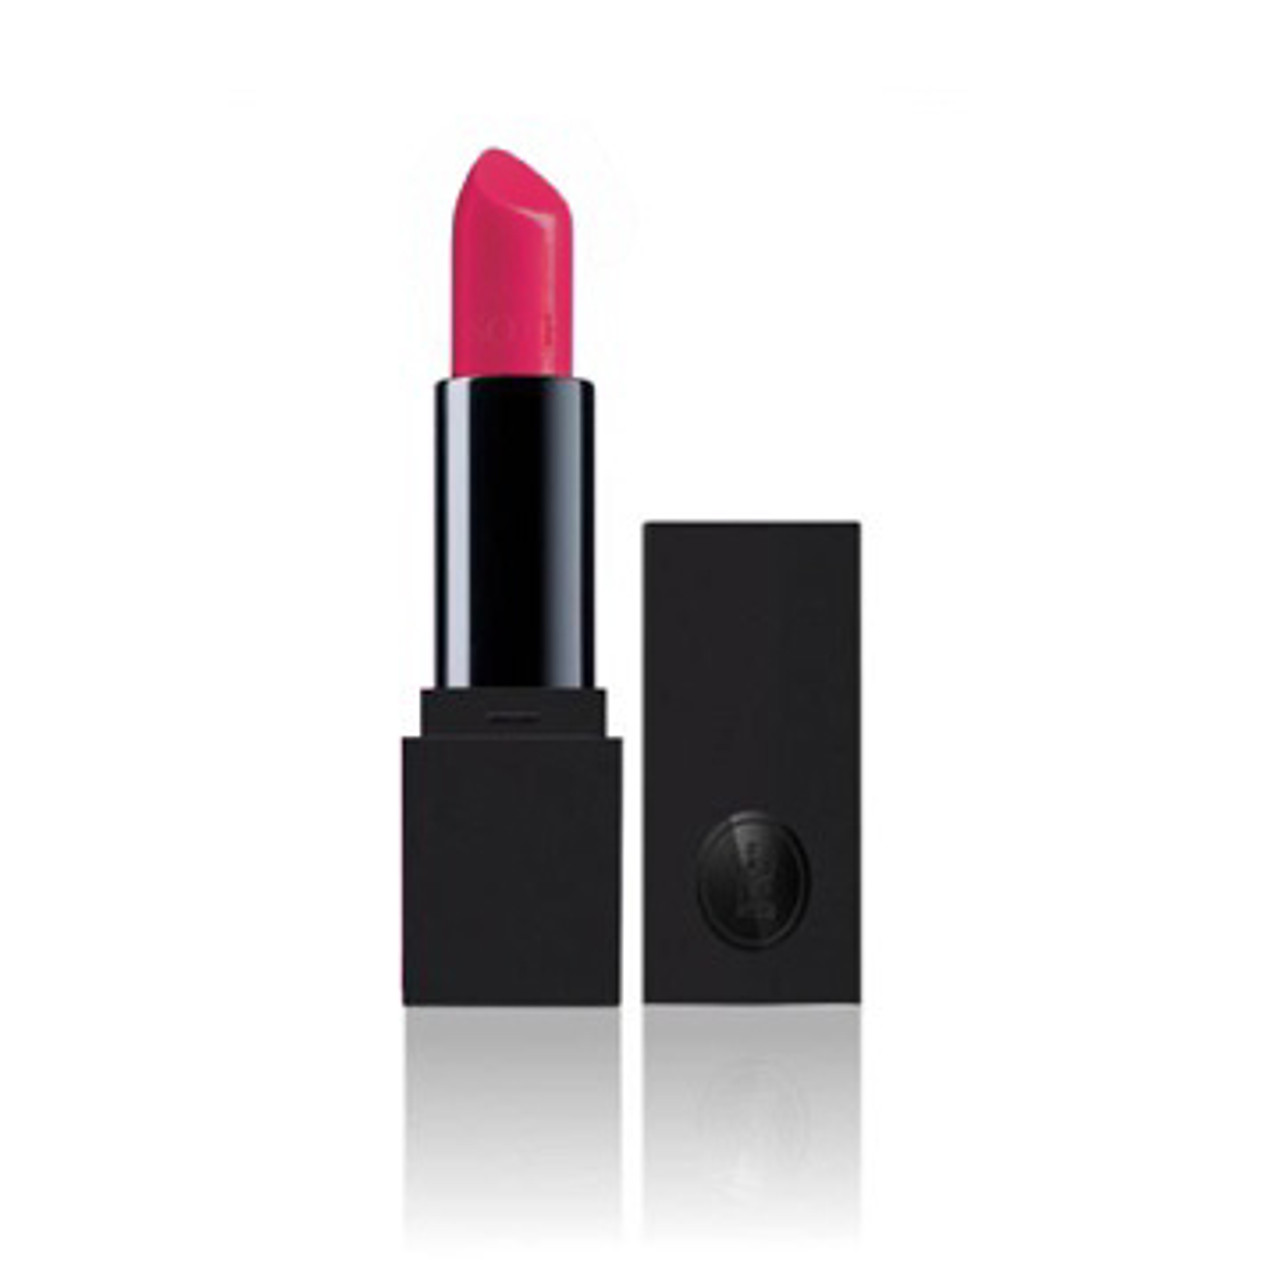 Sothys Rouge Doux Sothys Sheer Lipstick - 131 Rose Bonne Nouvelle - Free with $116 Purchase